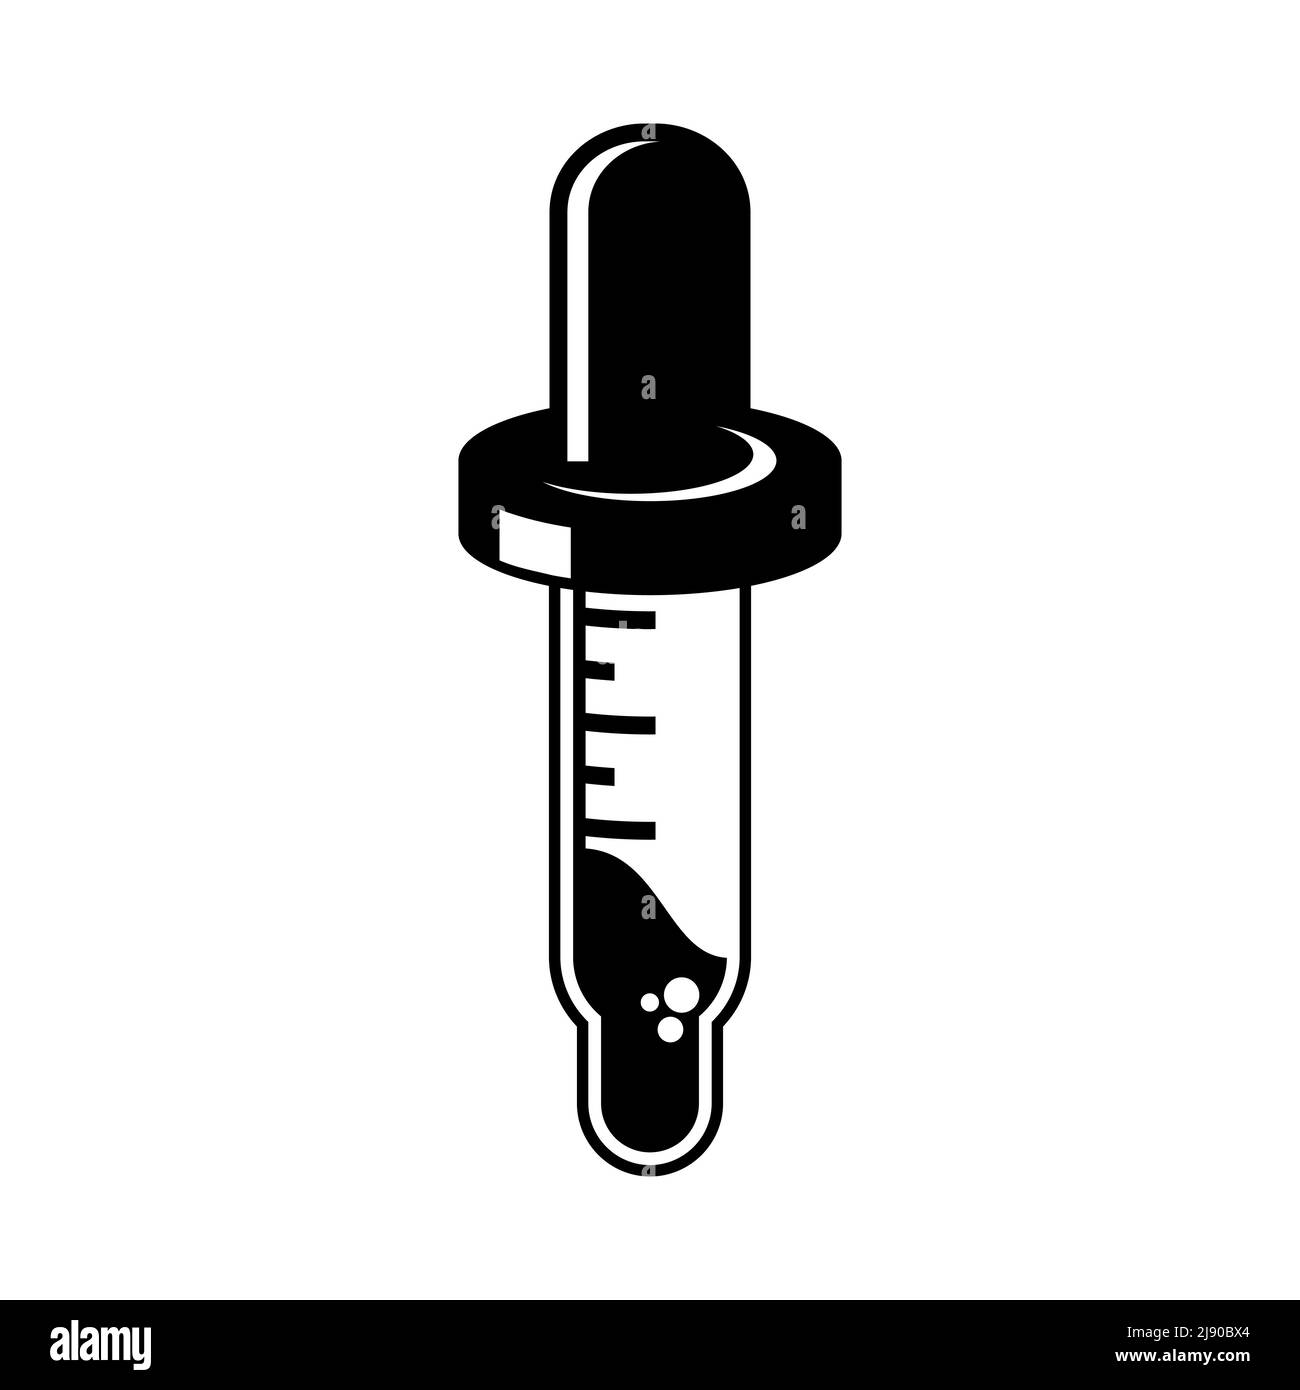 Dropper logo template. Pipette icon with liquid and units of measurement. Laboratory equipment design element. Chemistry and medicine tool. Vector Stock Vector